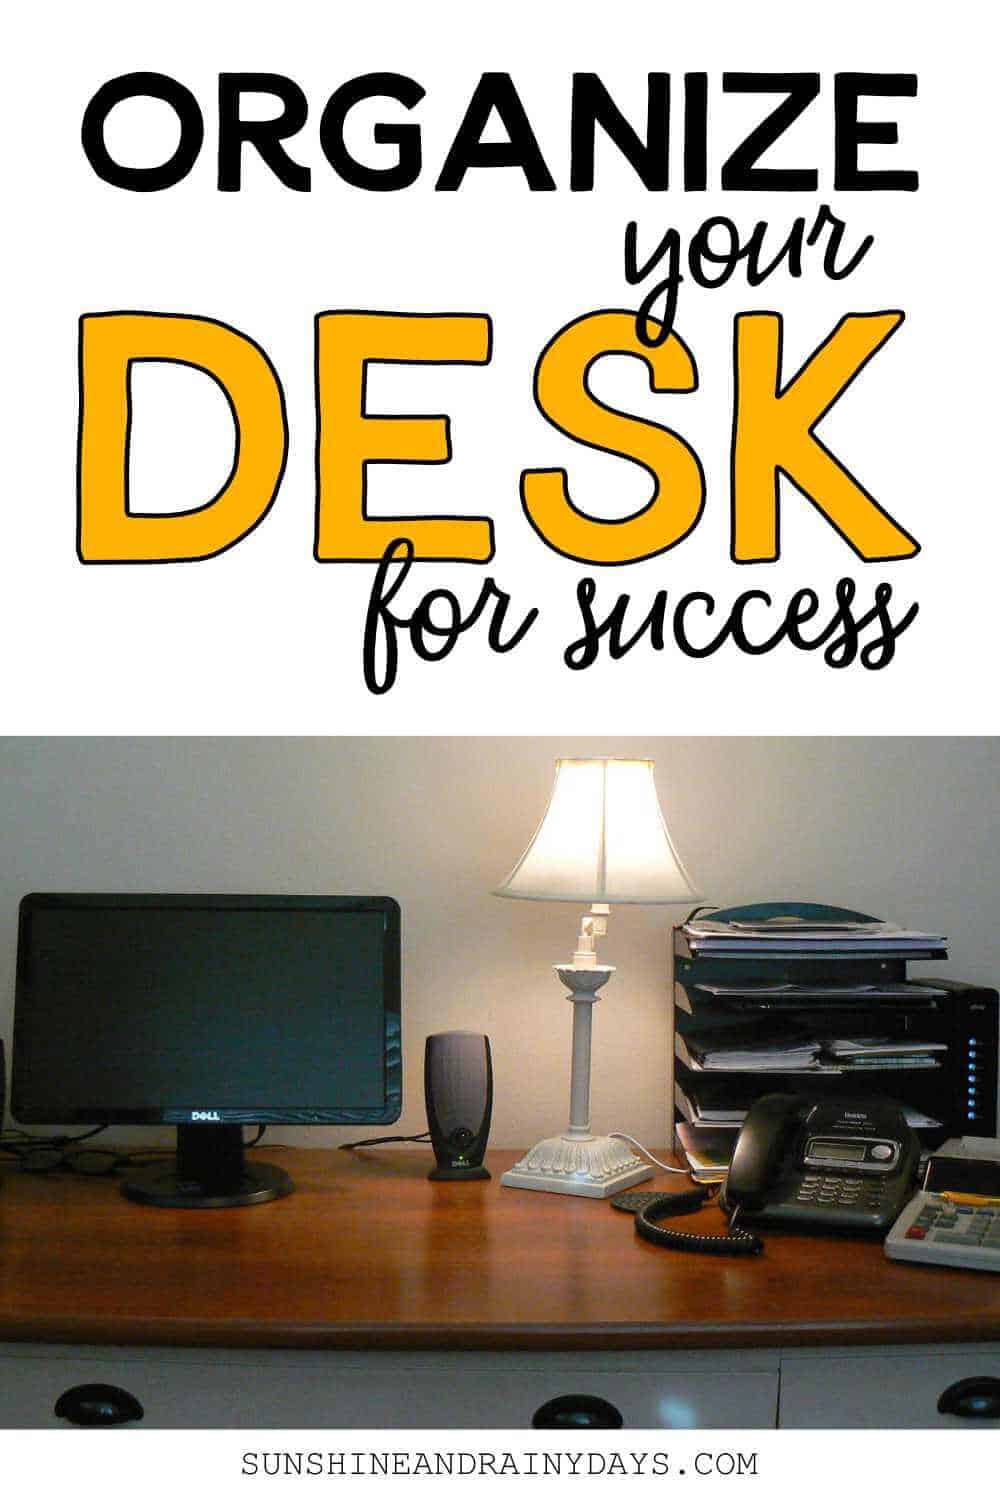 Organize Your Desk for Success - Cary Prince Organizing